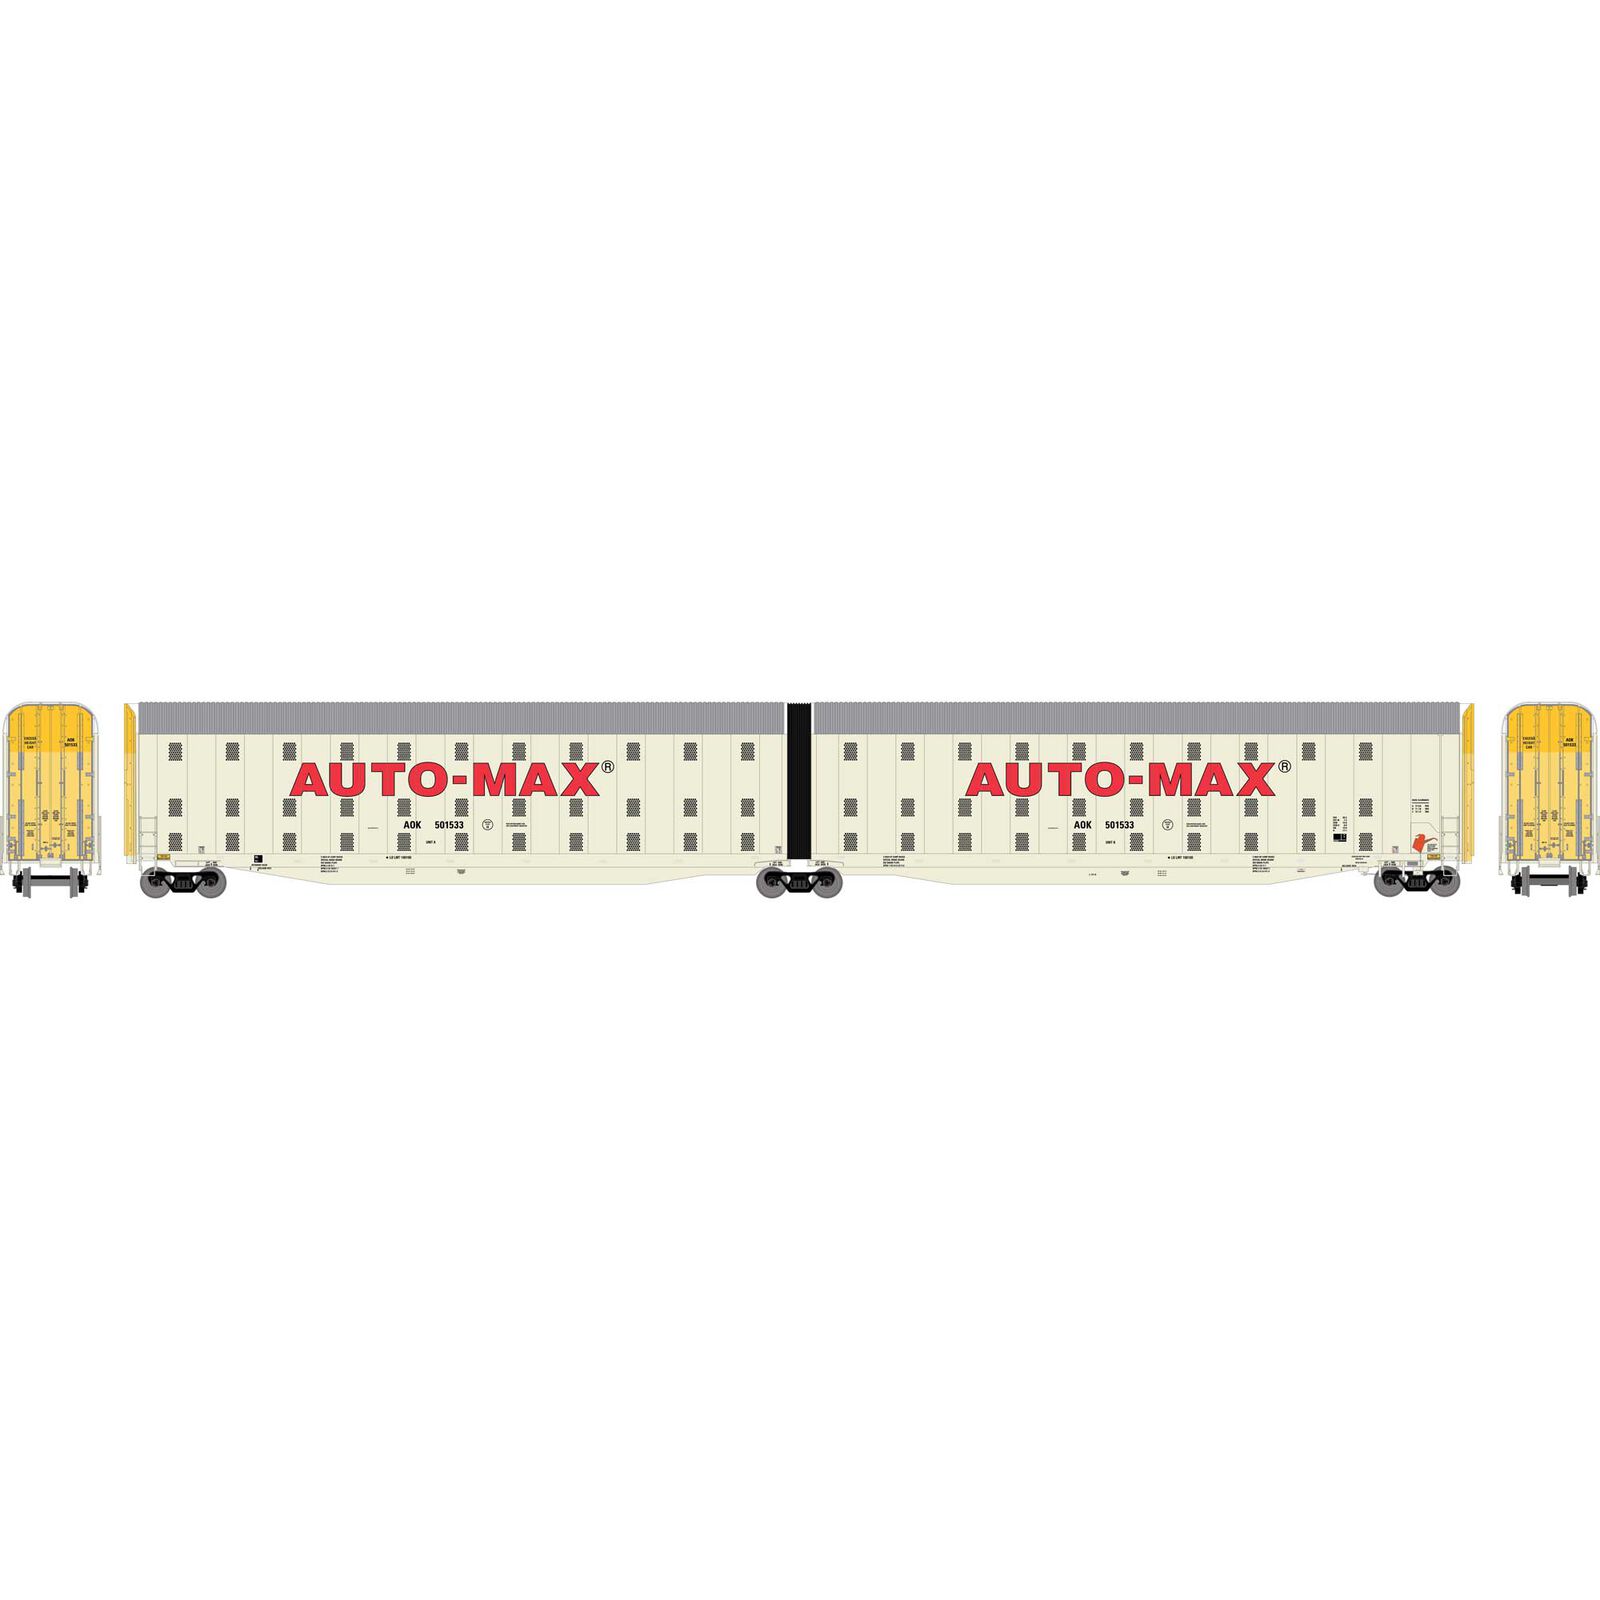 N Auto-Max Carrier, AOK #501533